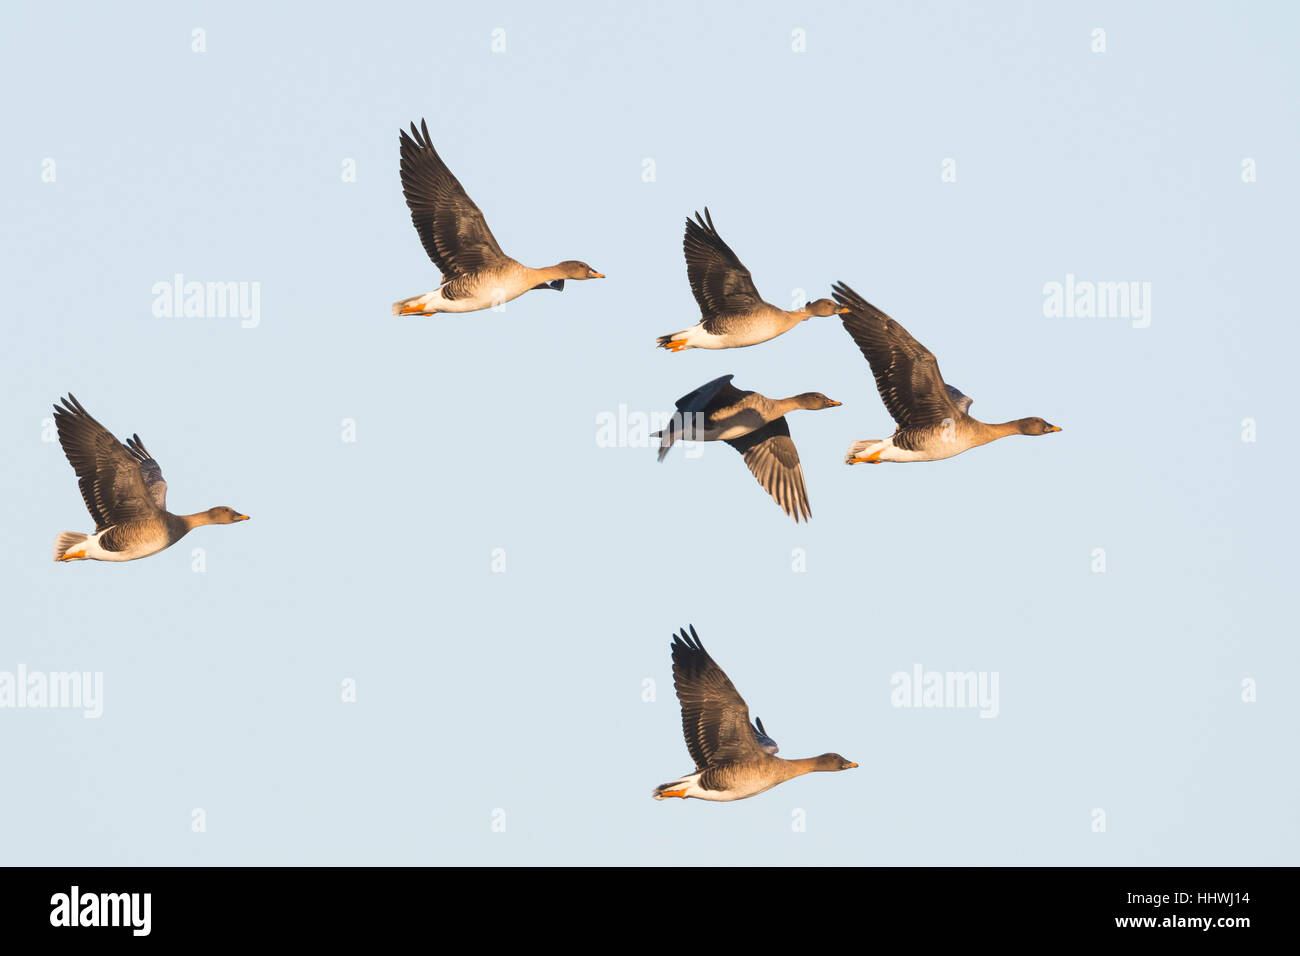 Bean geese (Anser fabalis) flying, Emsland, Lower Saxony, Germany Stock Photo